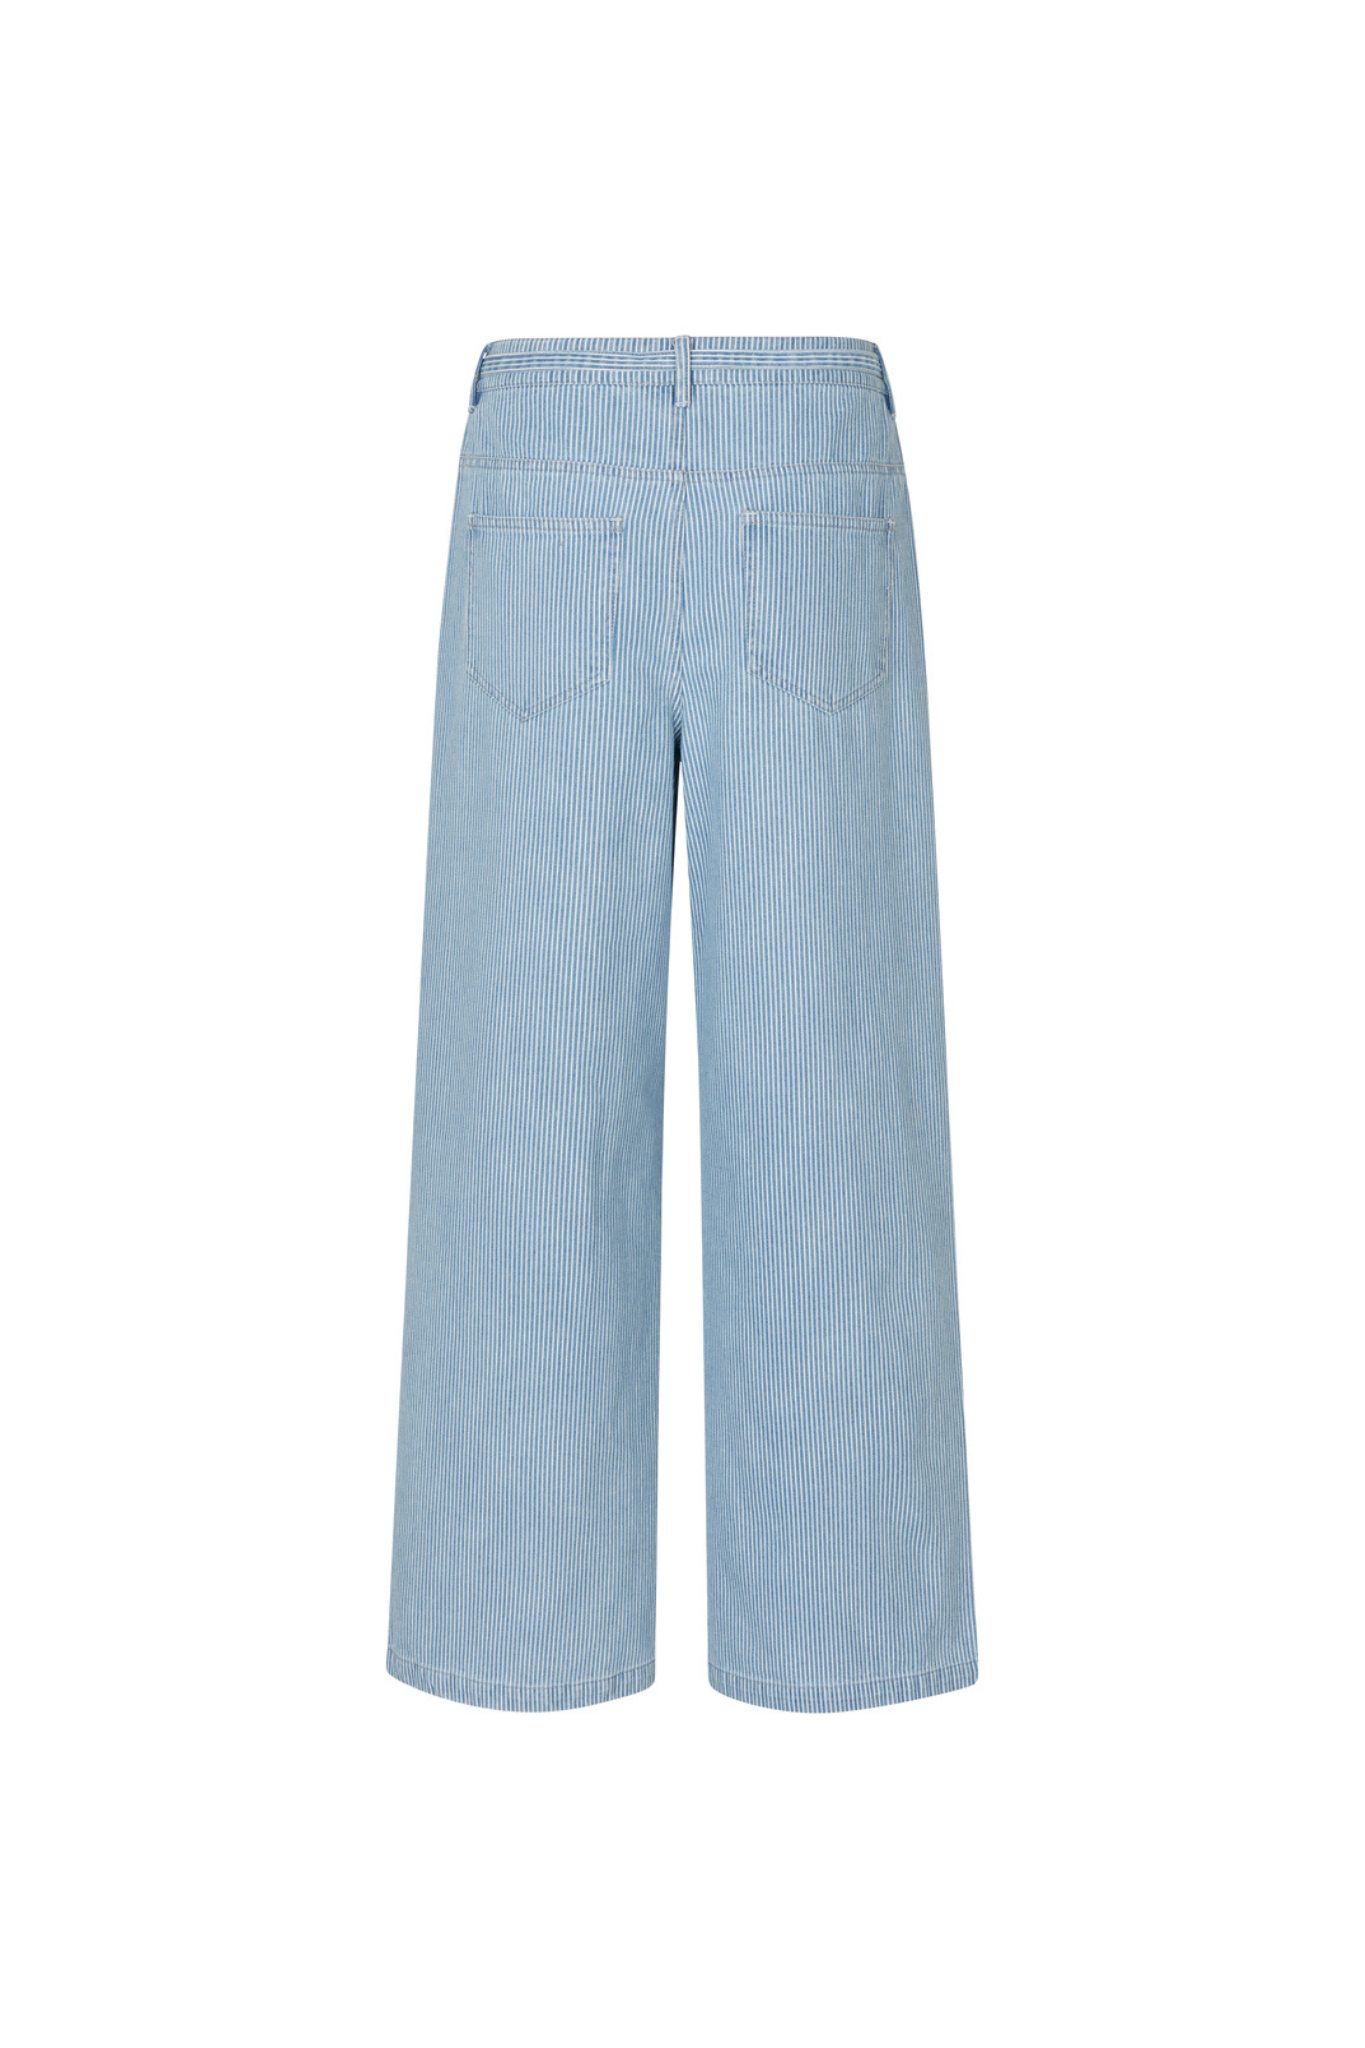 ISOLDE SOLID PANTS - DISTRESSED BLUE